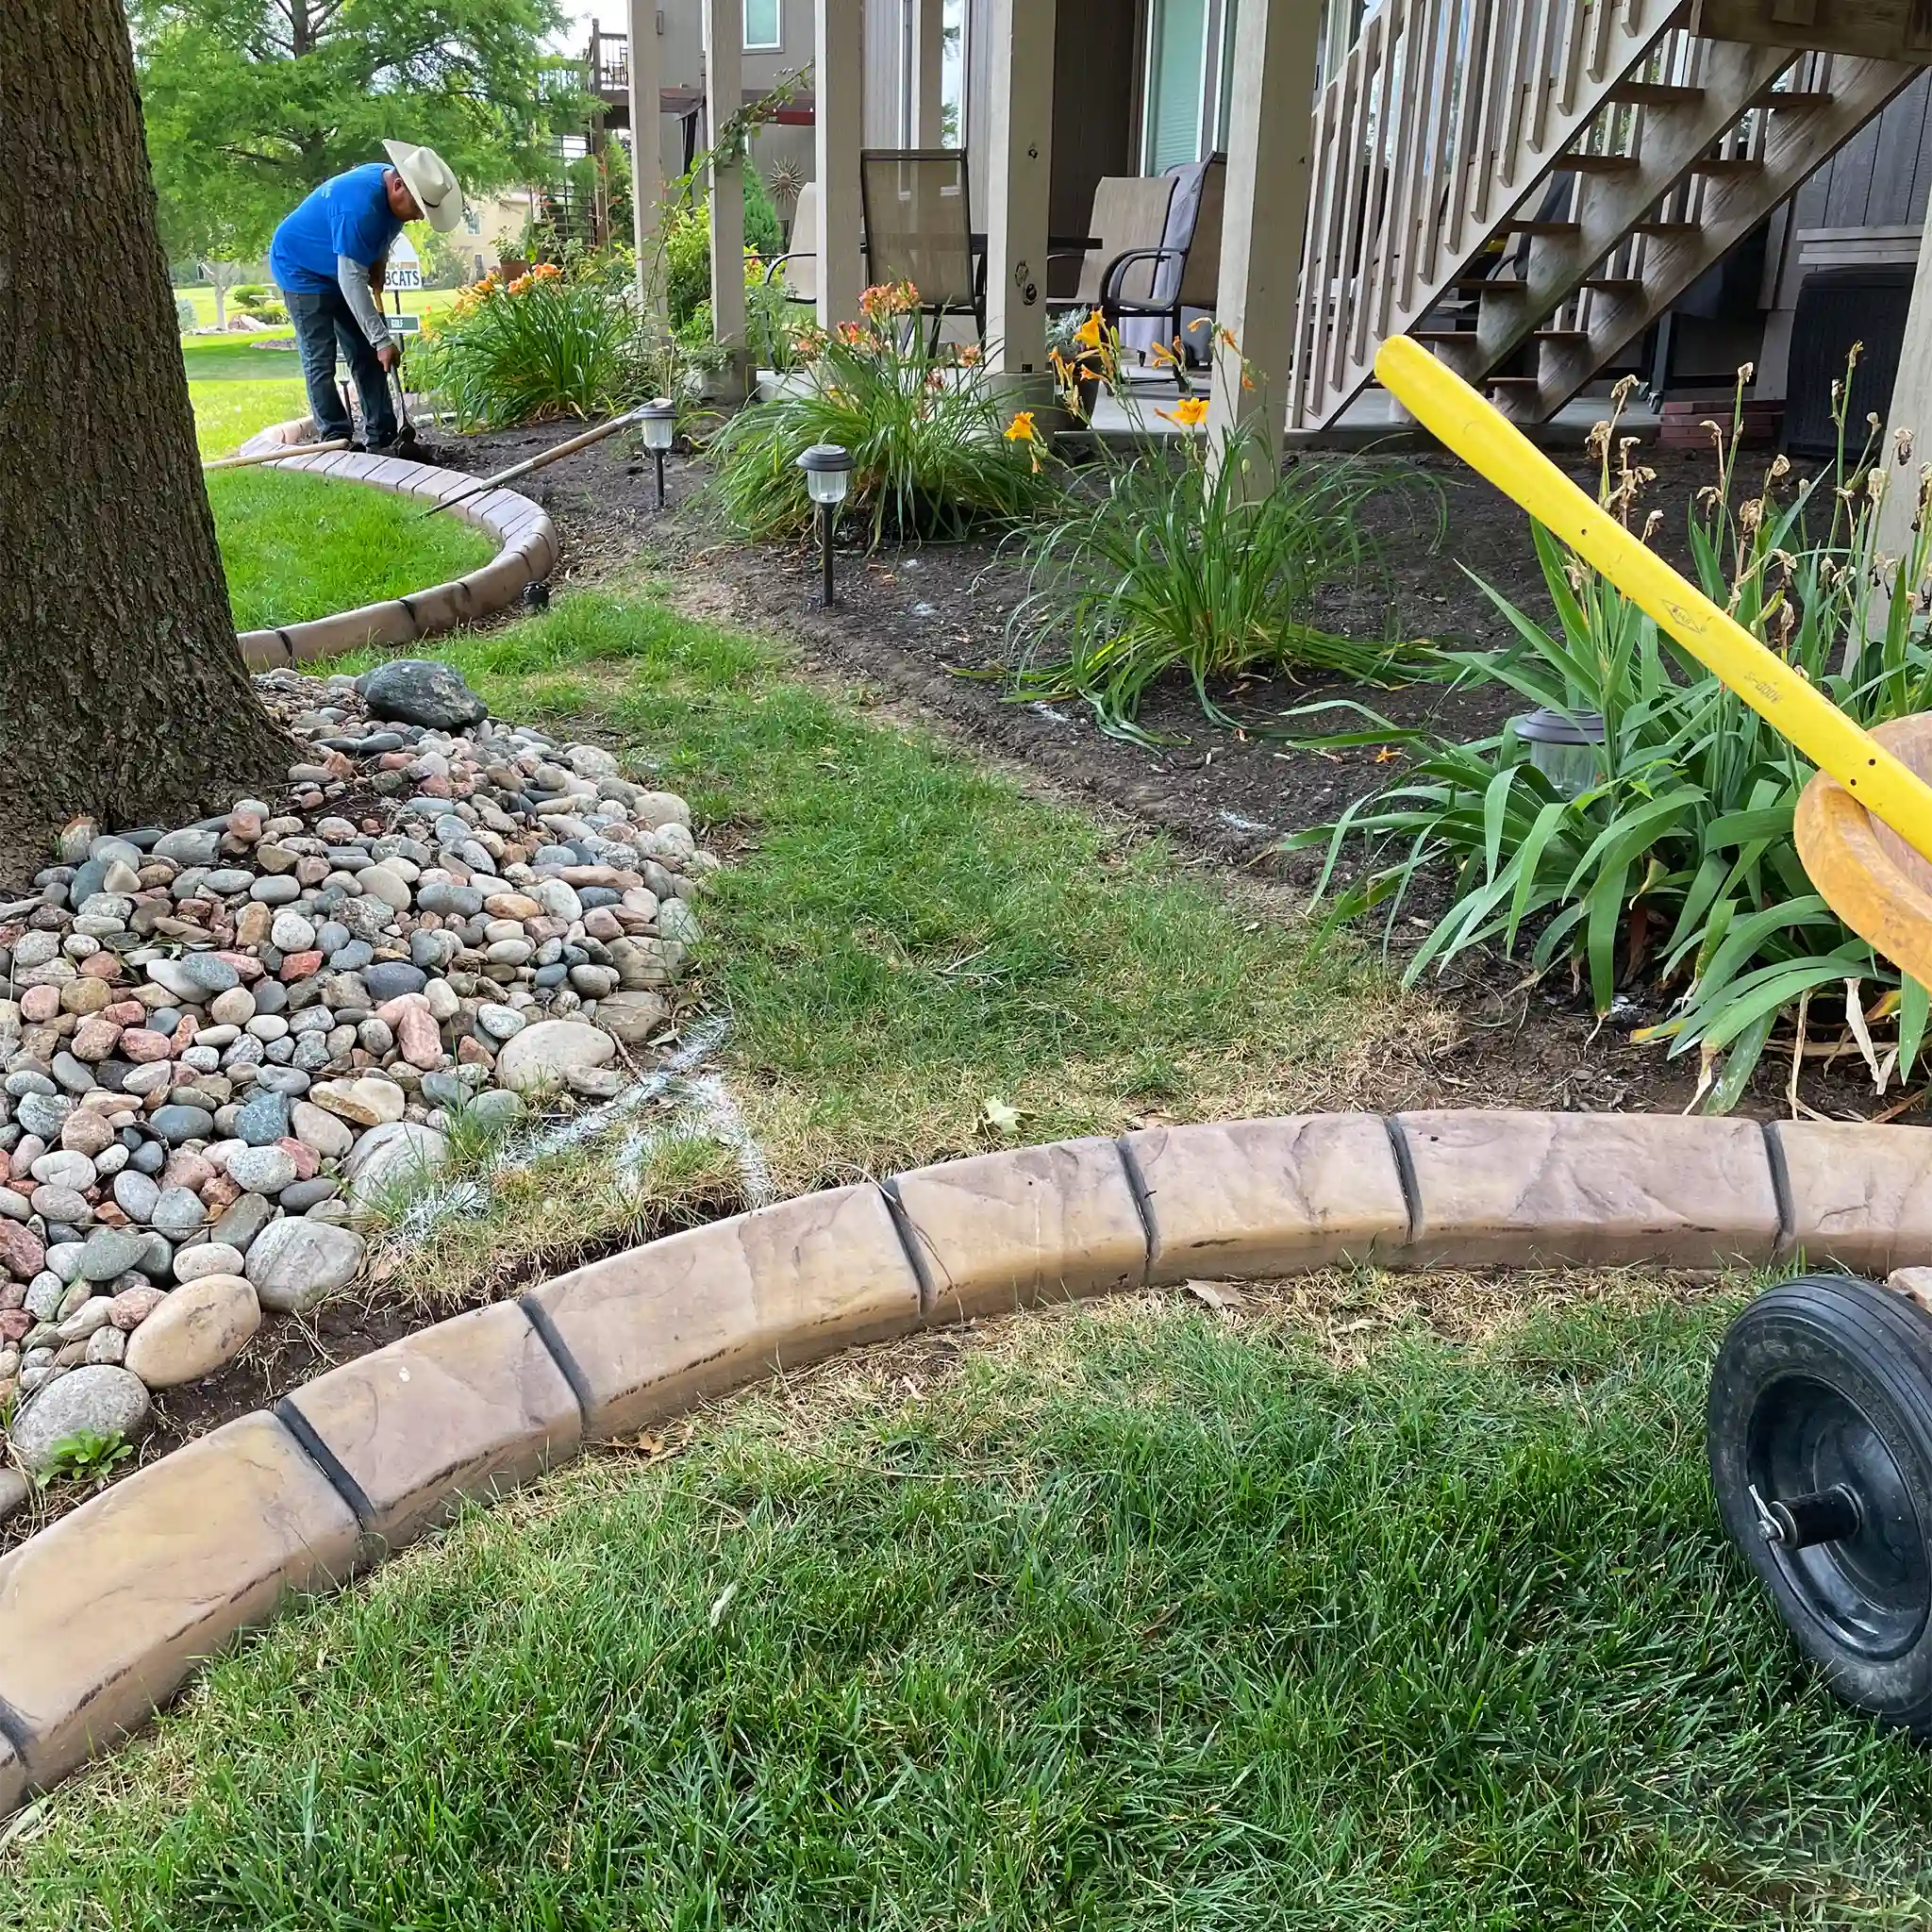 A worker prepares a backyard space prior to installing a new stone pathway.